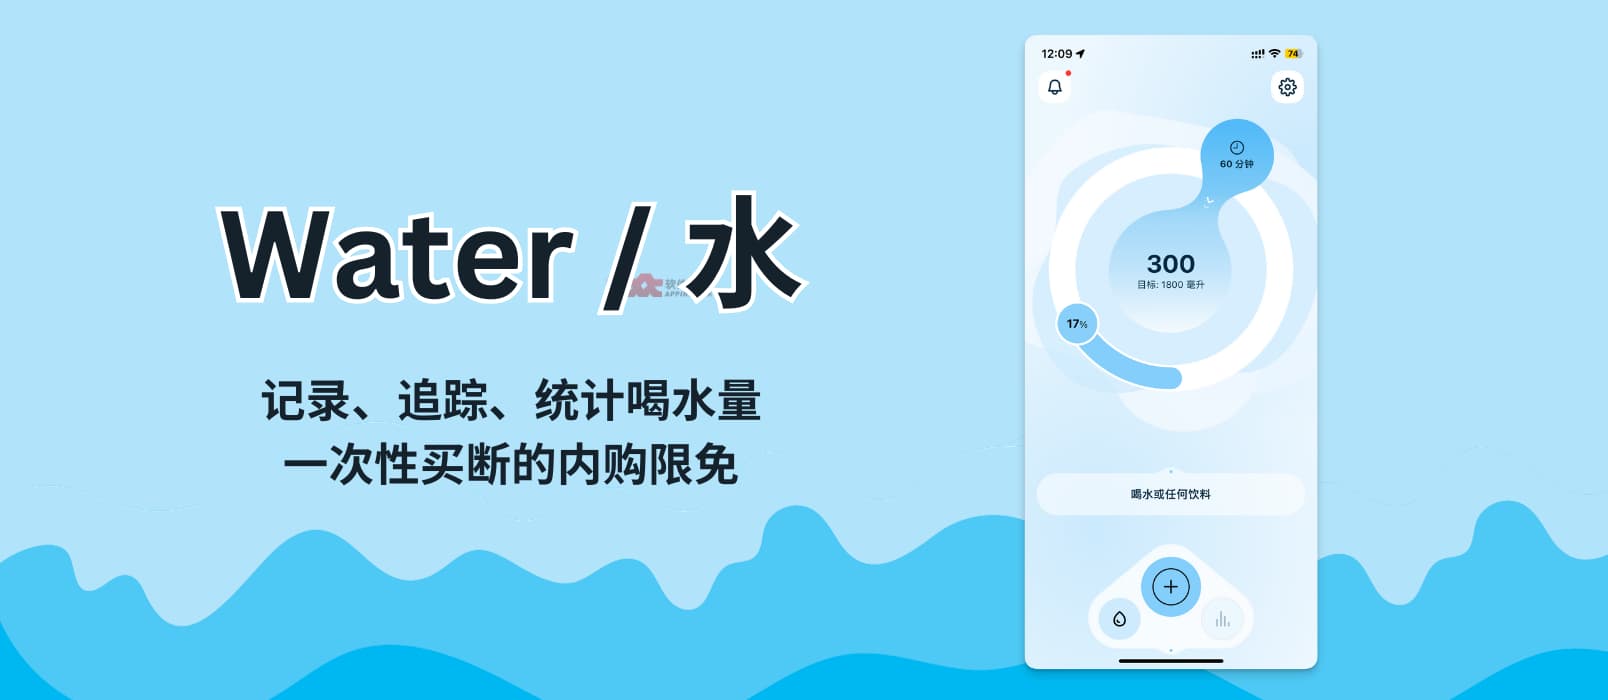 Water / 水 - 记录、追踪、统计喝水量，一次性买断的内购限免[iPhone/Apple Watch]